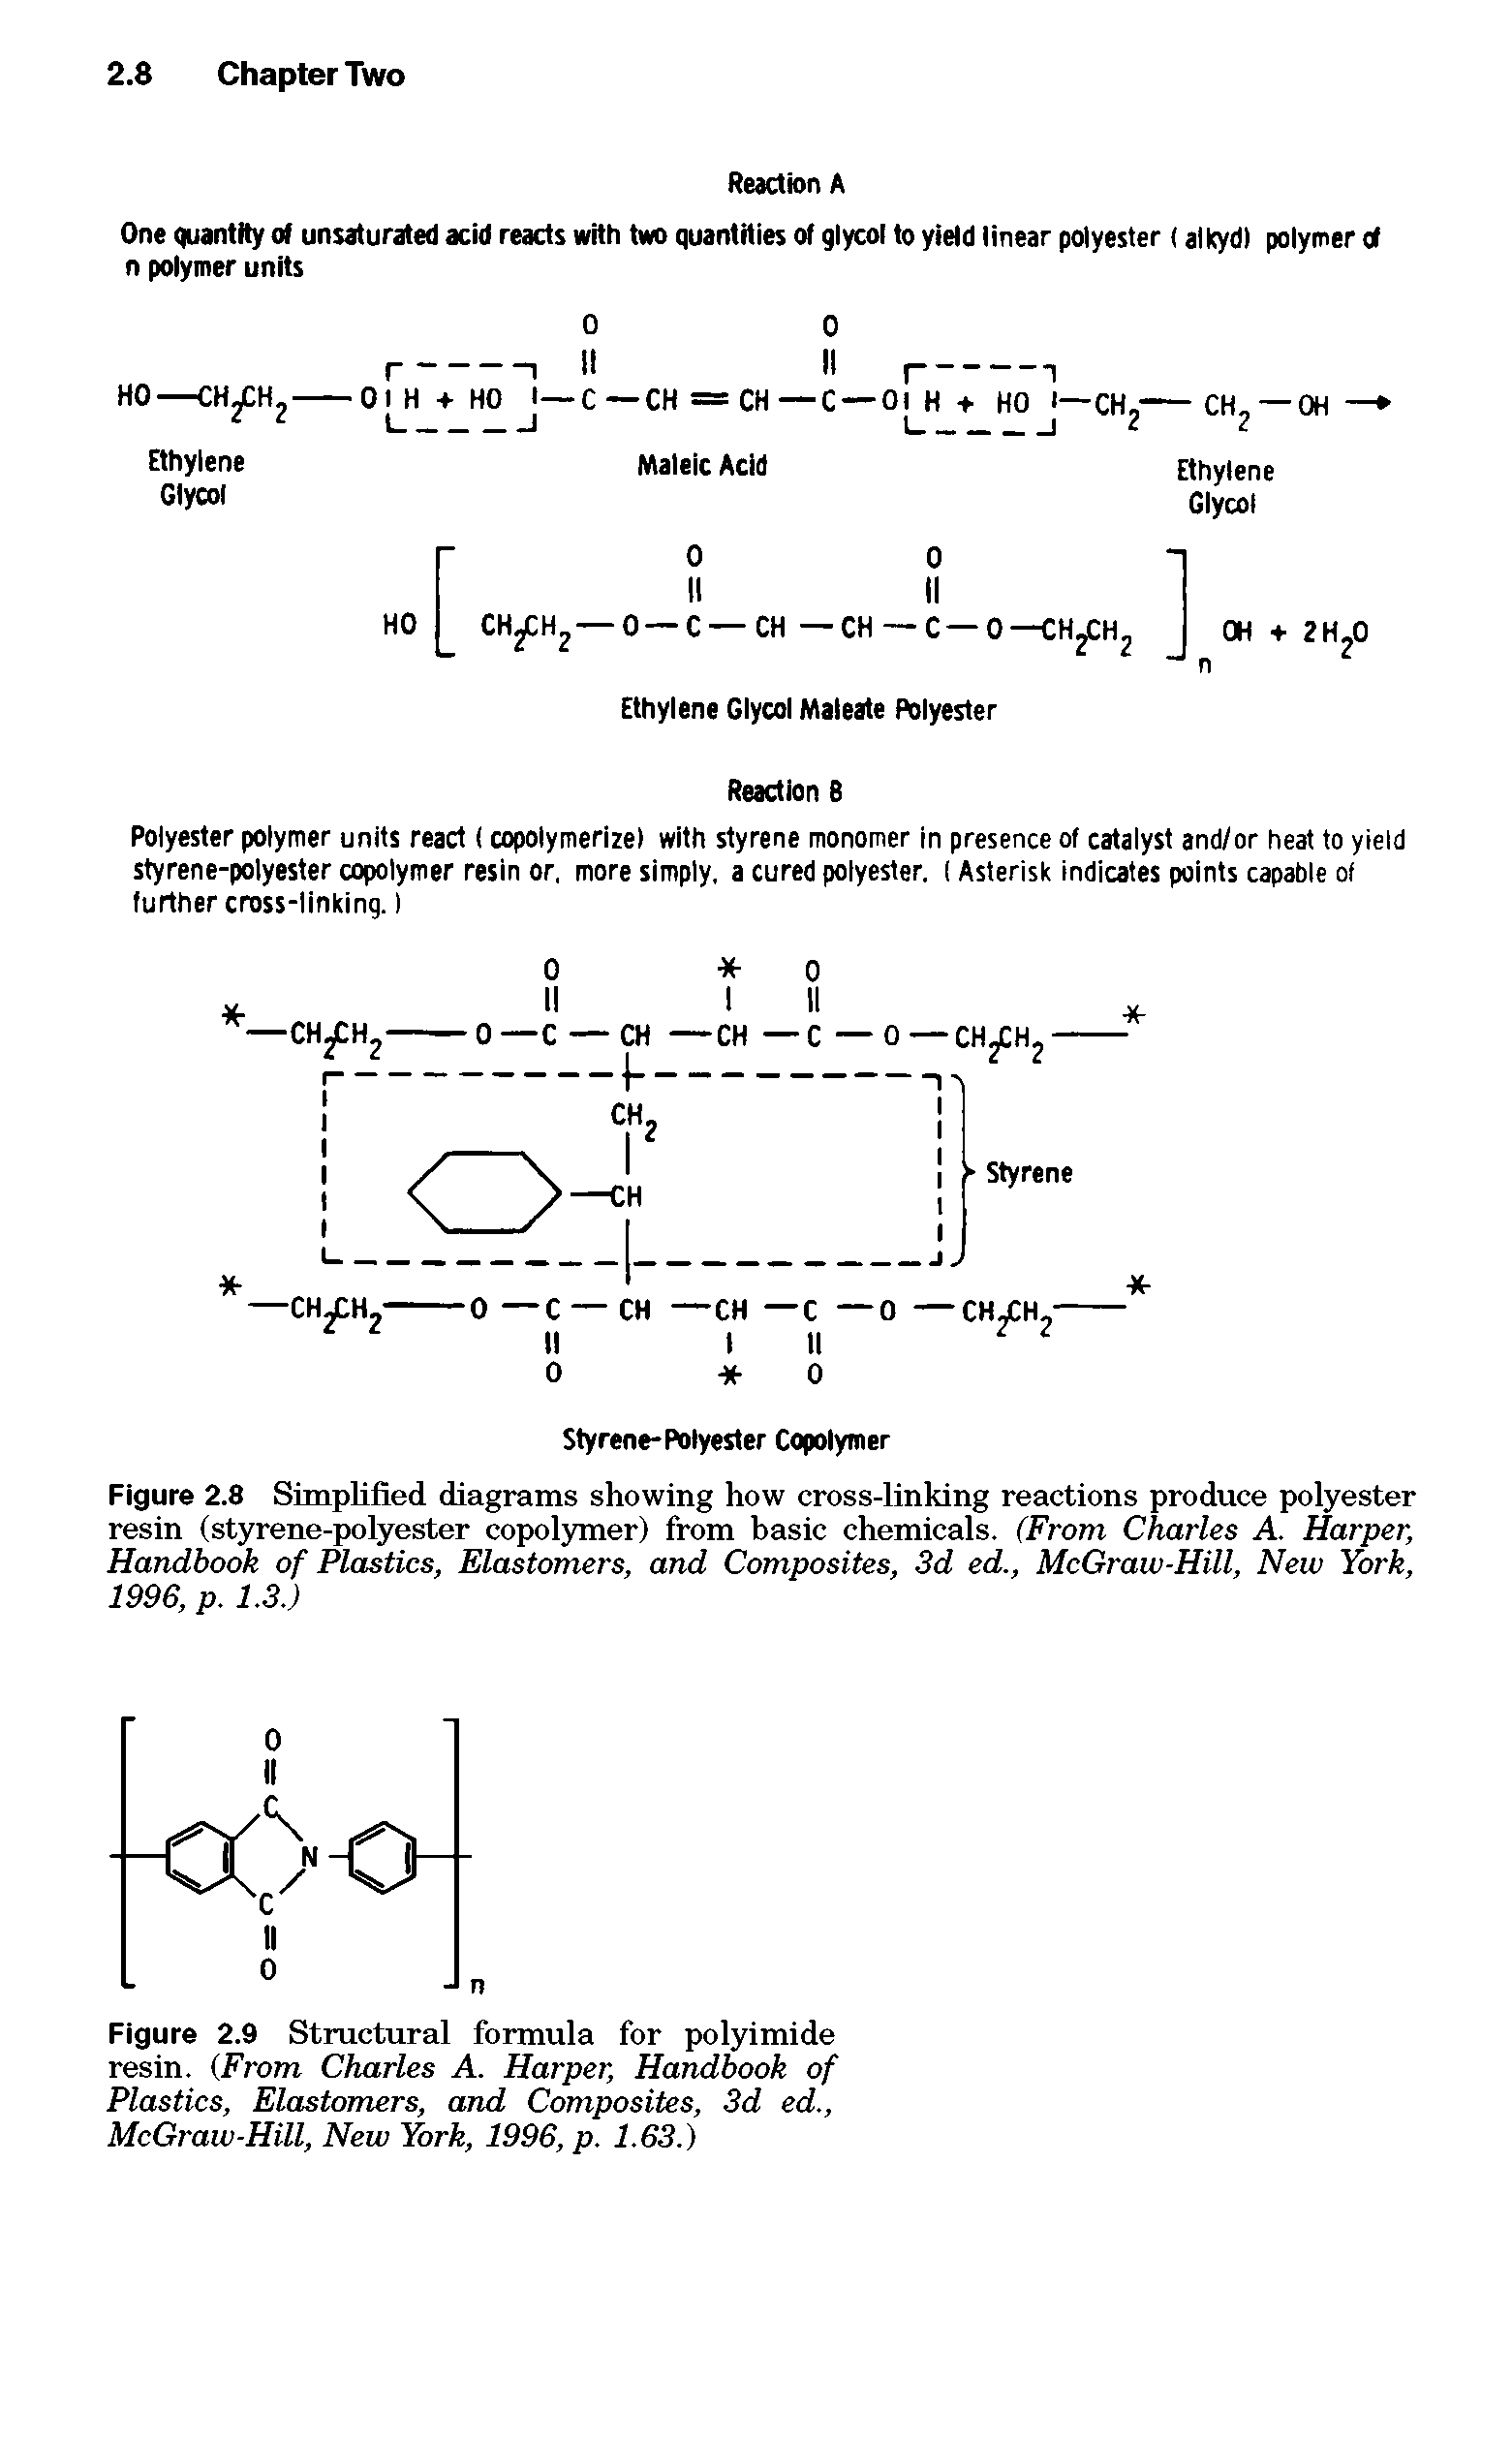 Figure 2.8 Simplified diagrams showing how cross-linking reactions produce polyester resin (styrene-polyester copolymer) from basic chemicals. (From Charles A. Harper, Handbook of Plastics, Elastomers, and Composites, 3d ed., McGraw-Hill, New York, 1996, p. 1.3.)...